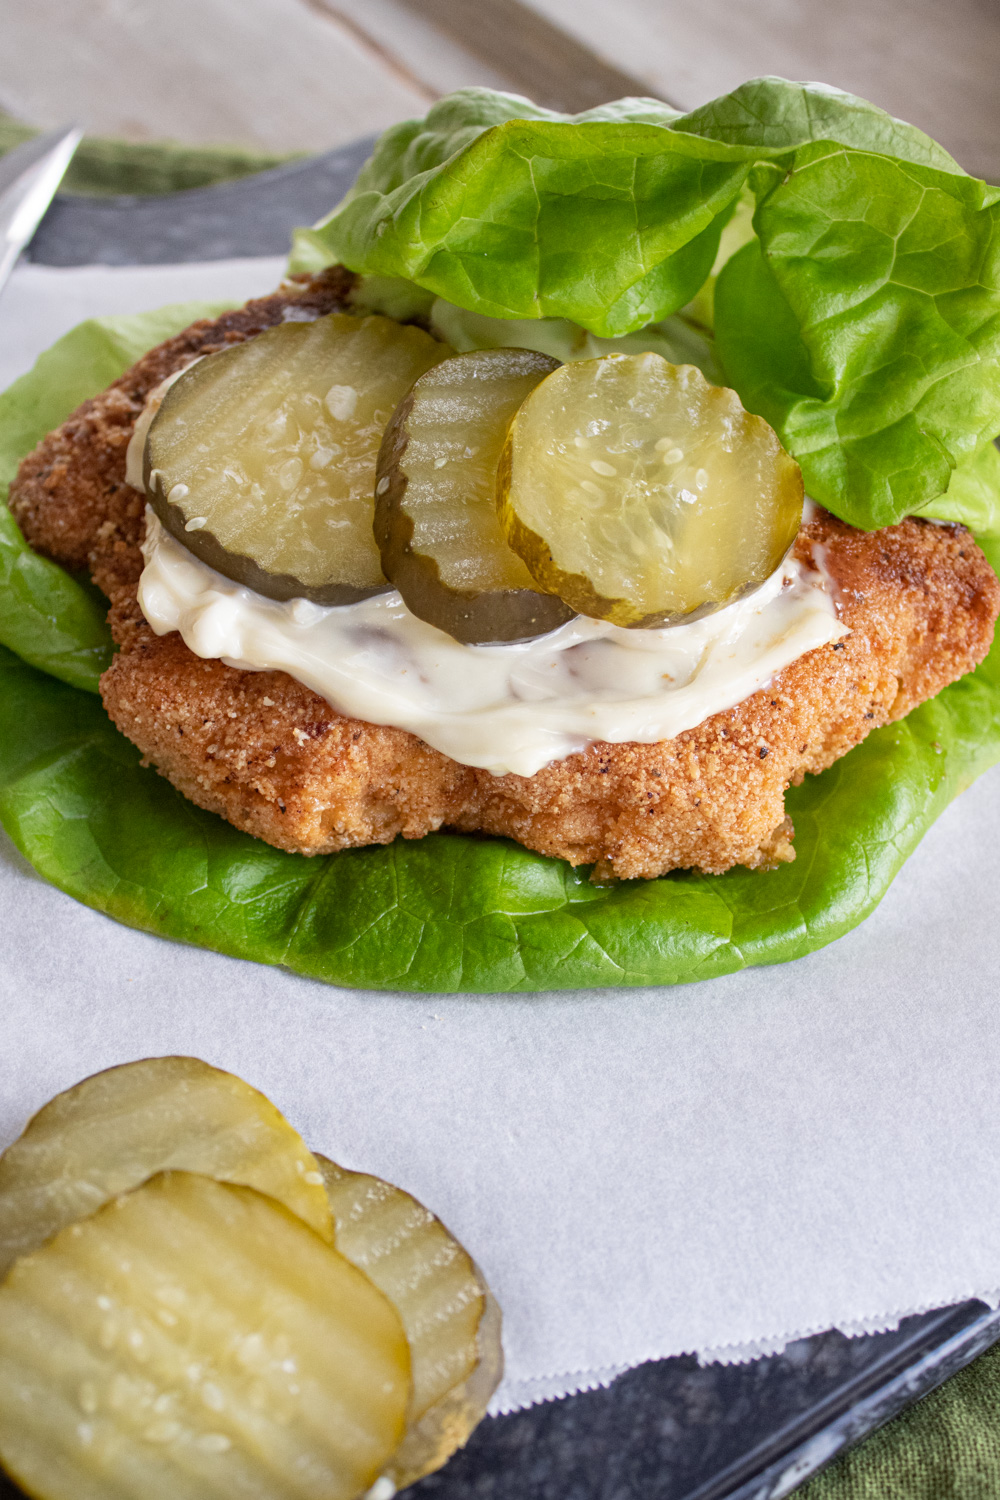 Chick-fil-a sandwich on lettuce with pickles